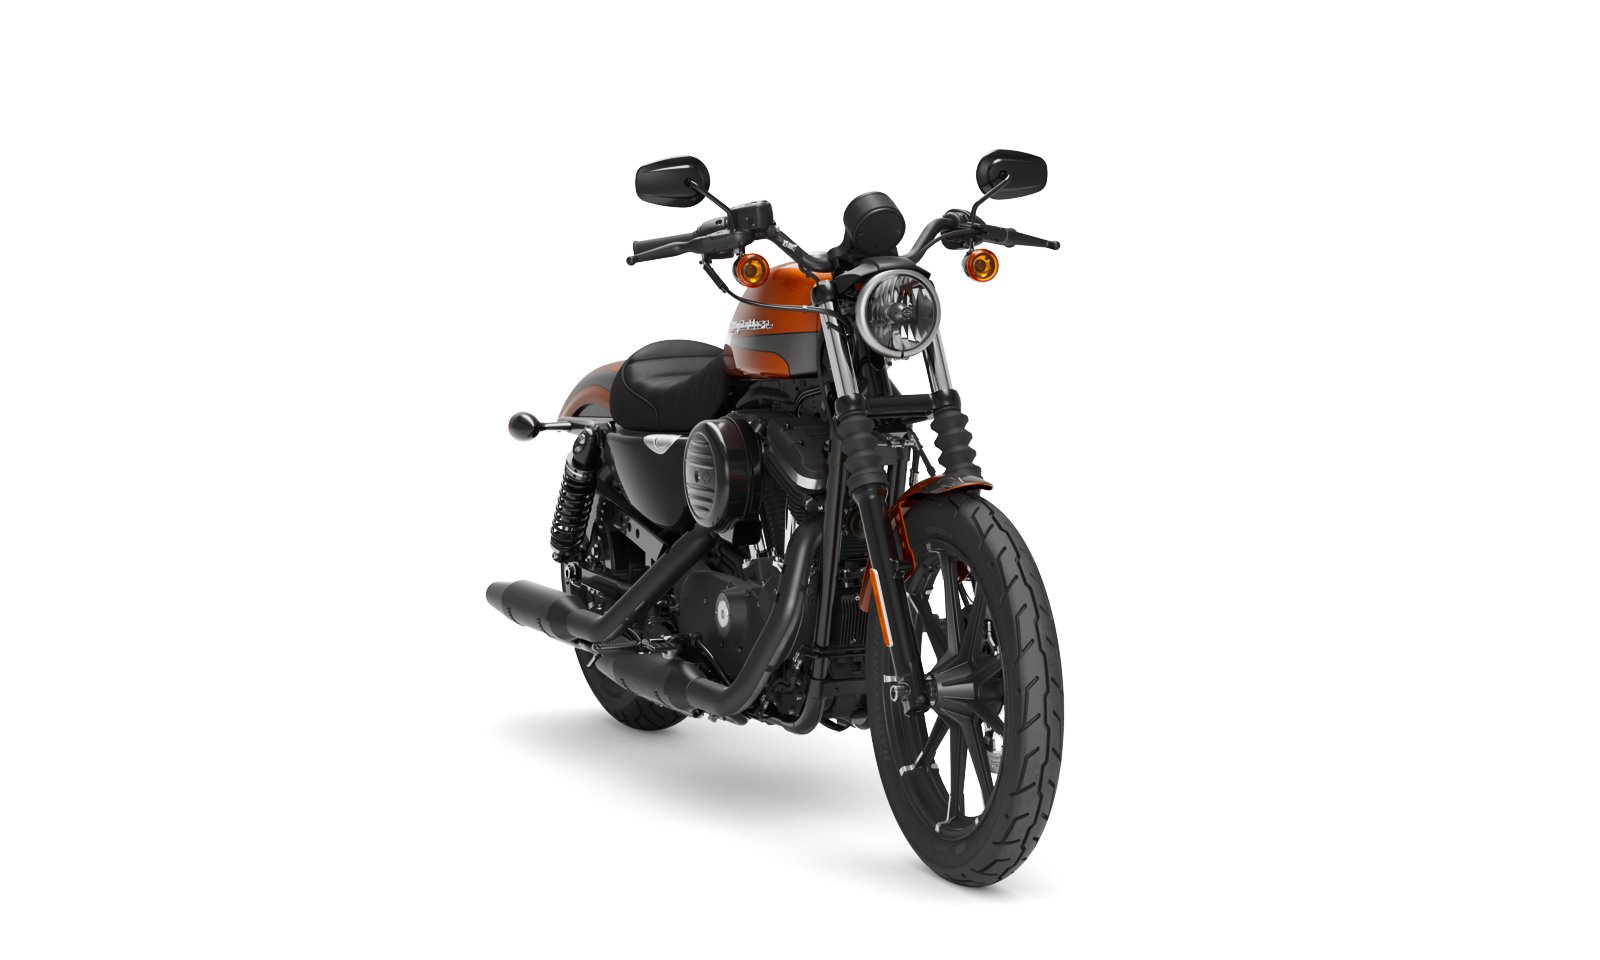 2020 Iron 883 Motorcycle Harley Davidson Asia Pacific Markets